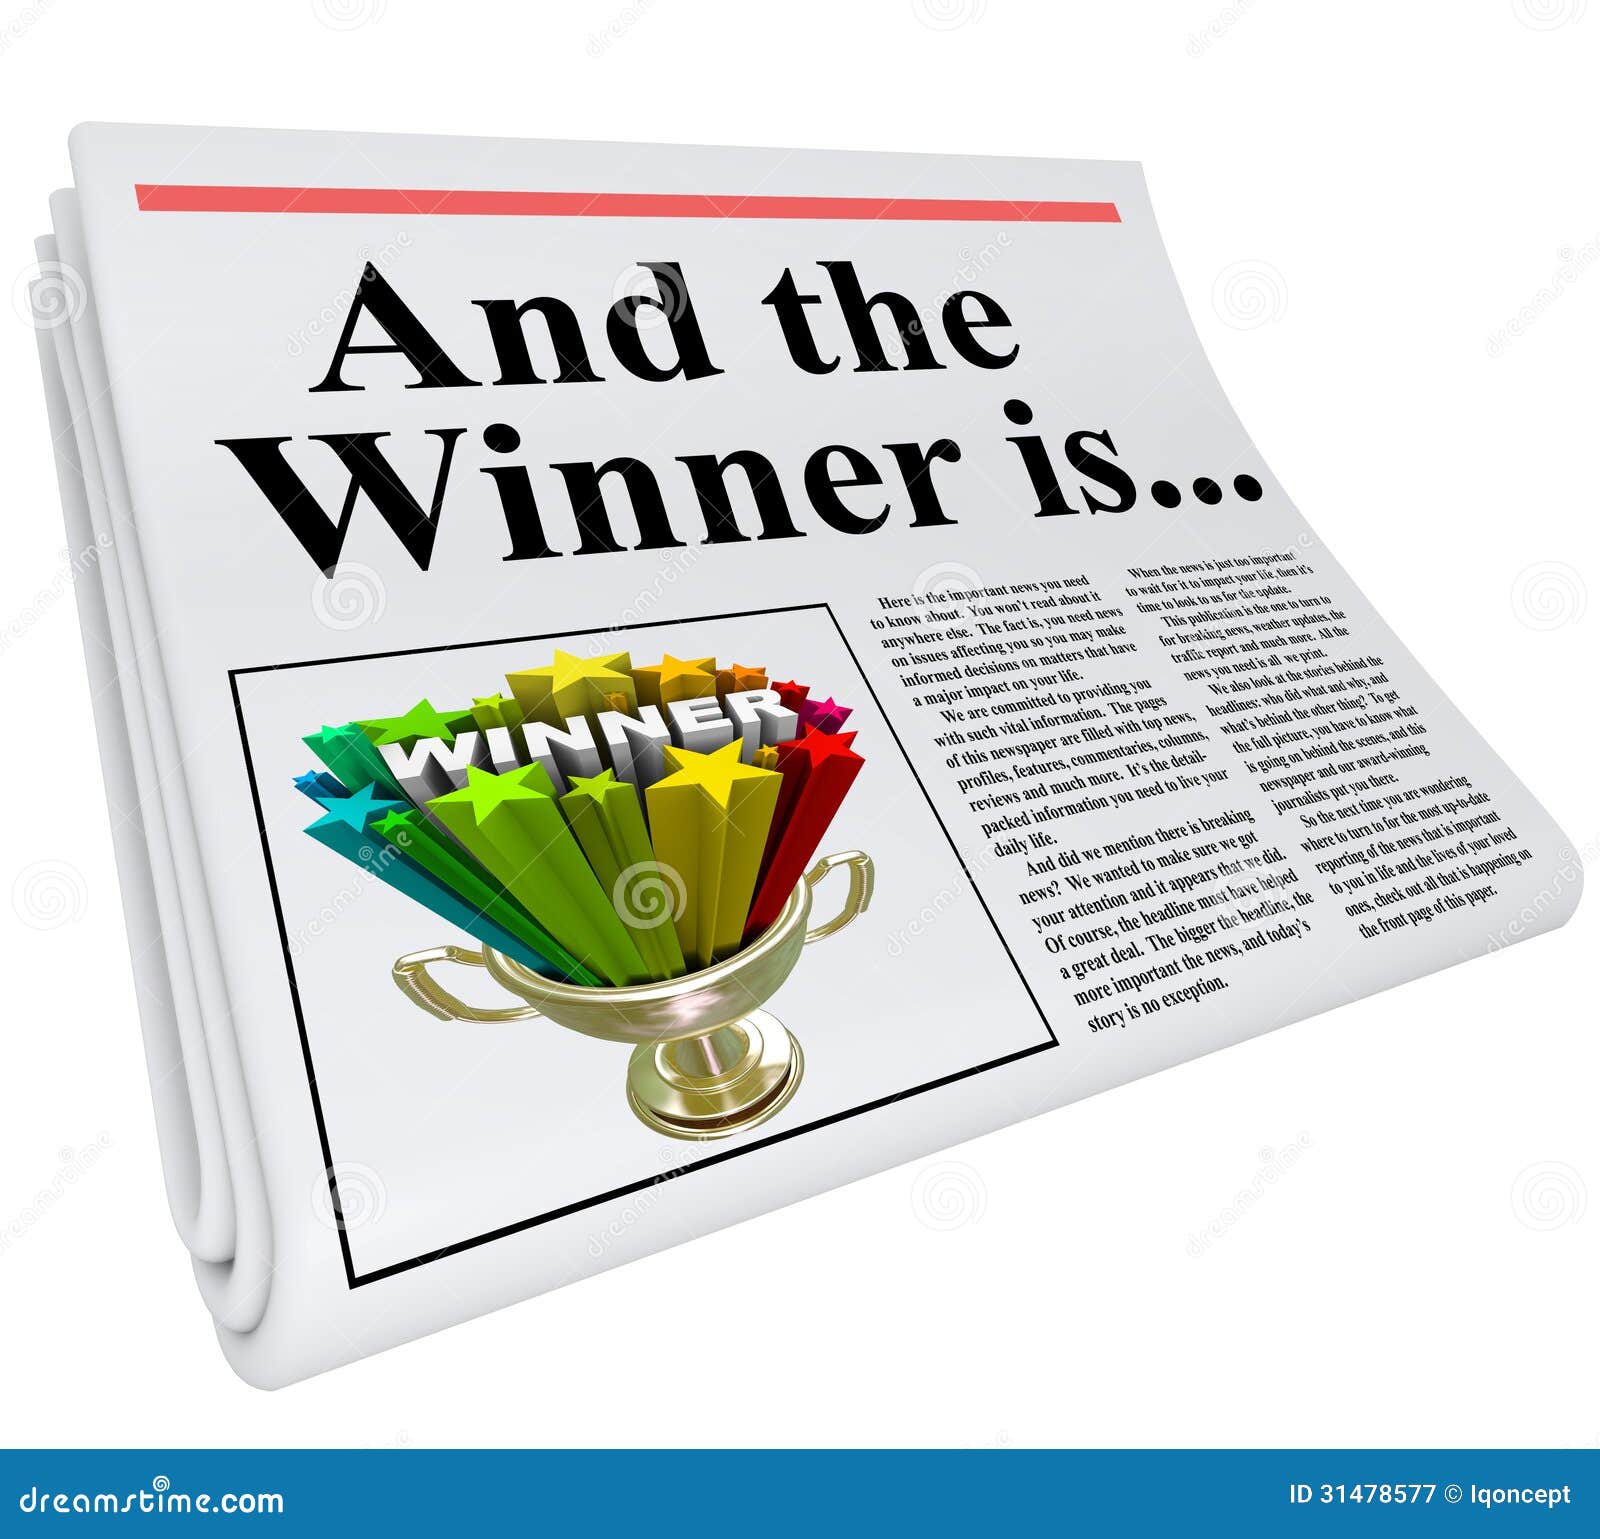 clipart and the winner is - photo #3